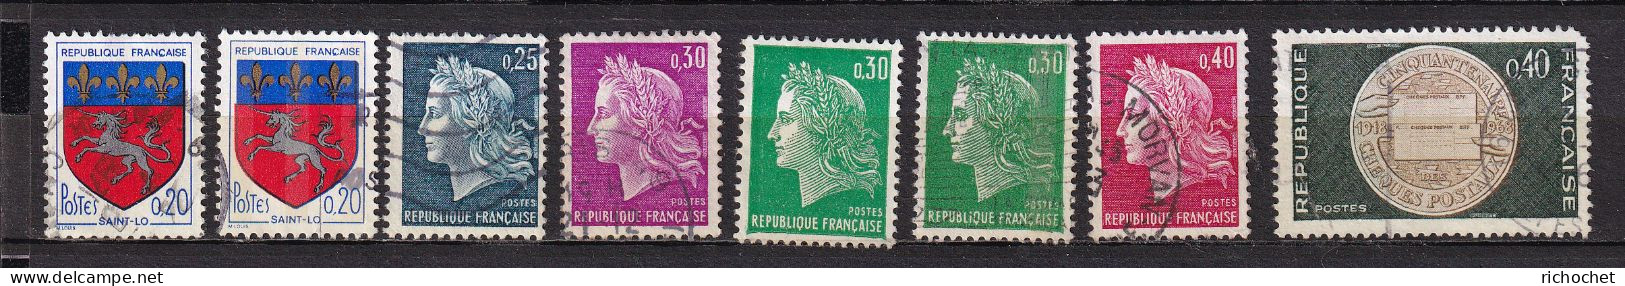 France 1510 + 1510c + 1535 + 1536 + 1536 A + 1536 B + 1542 + 1611 B ° - Used Stamps